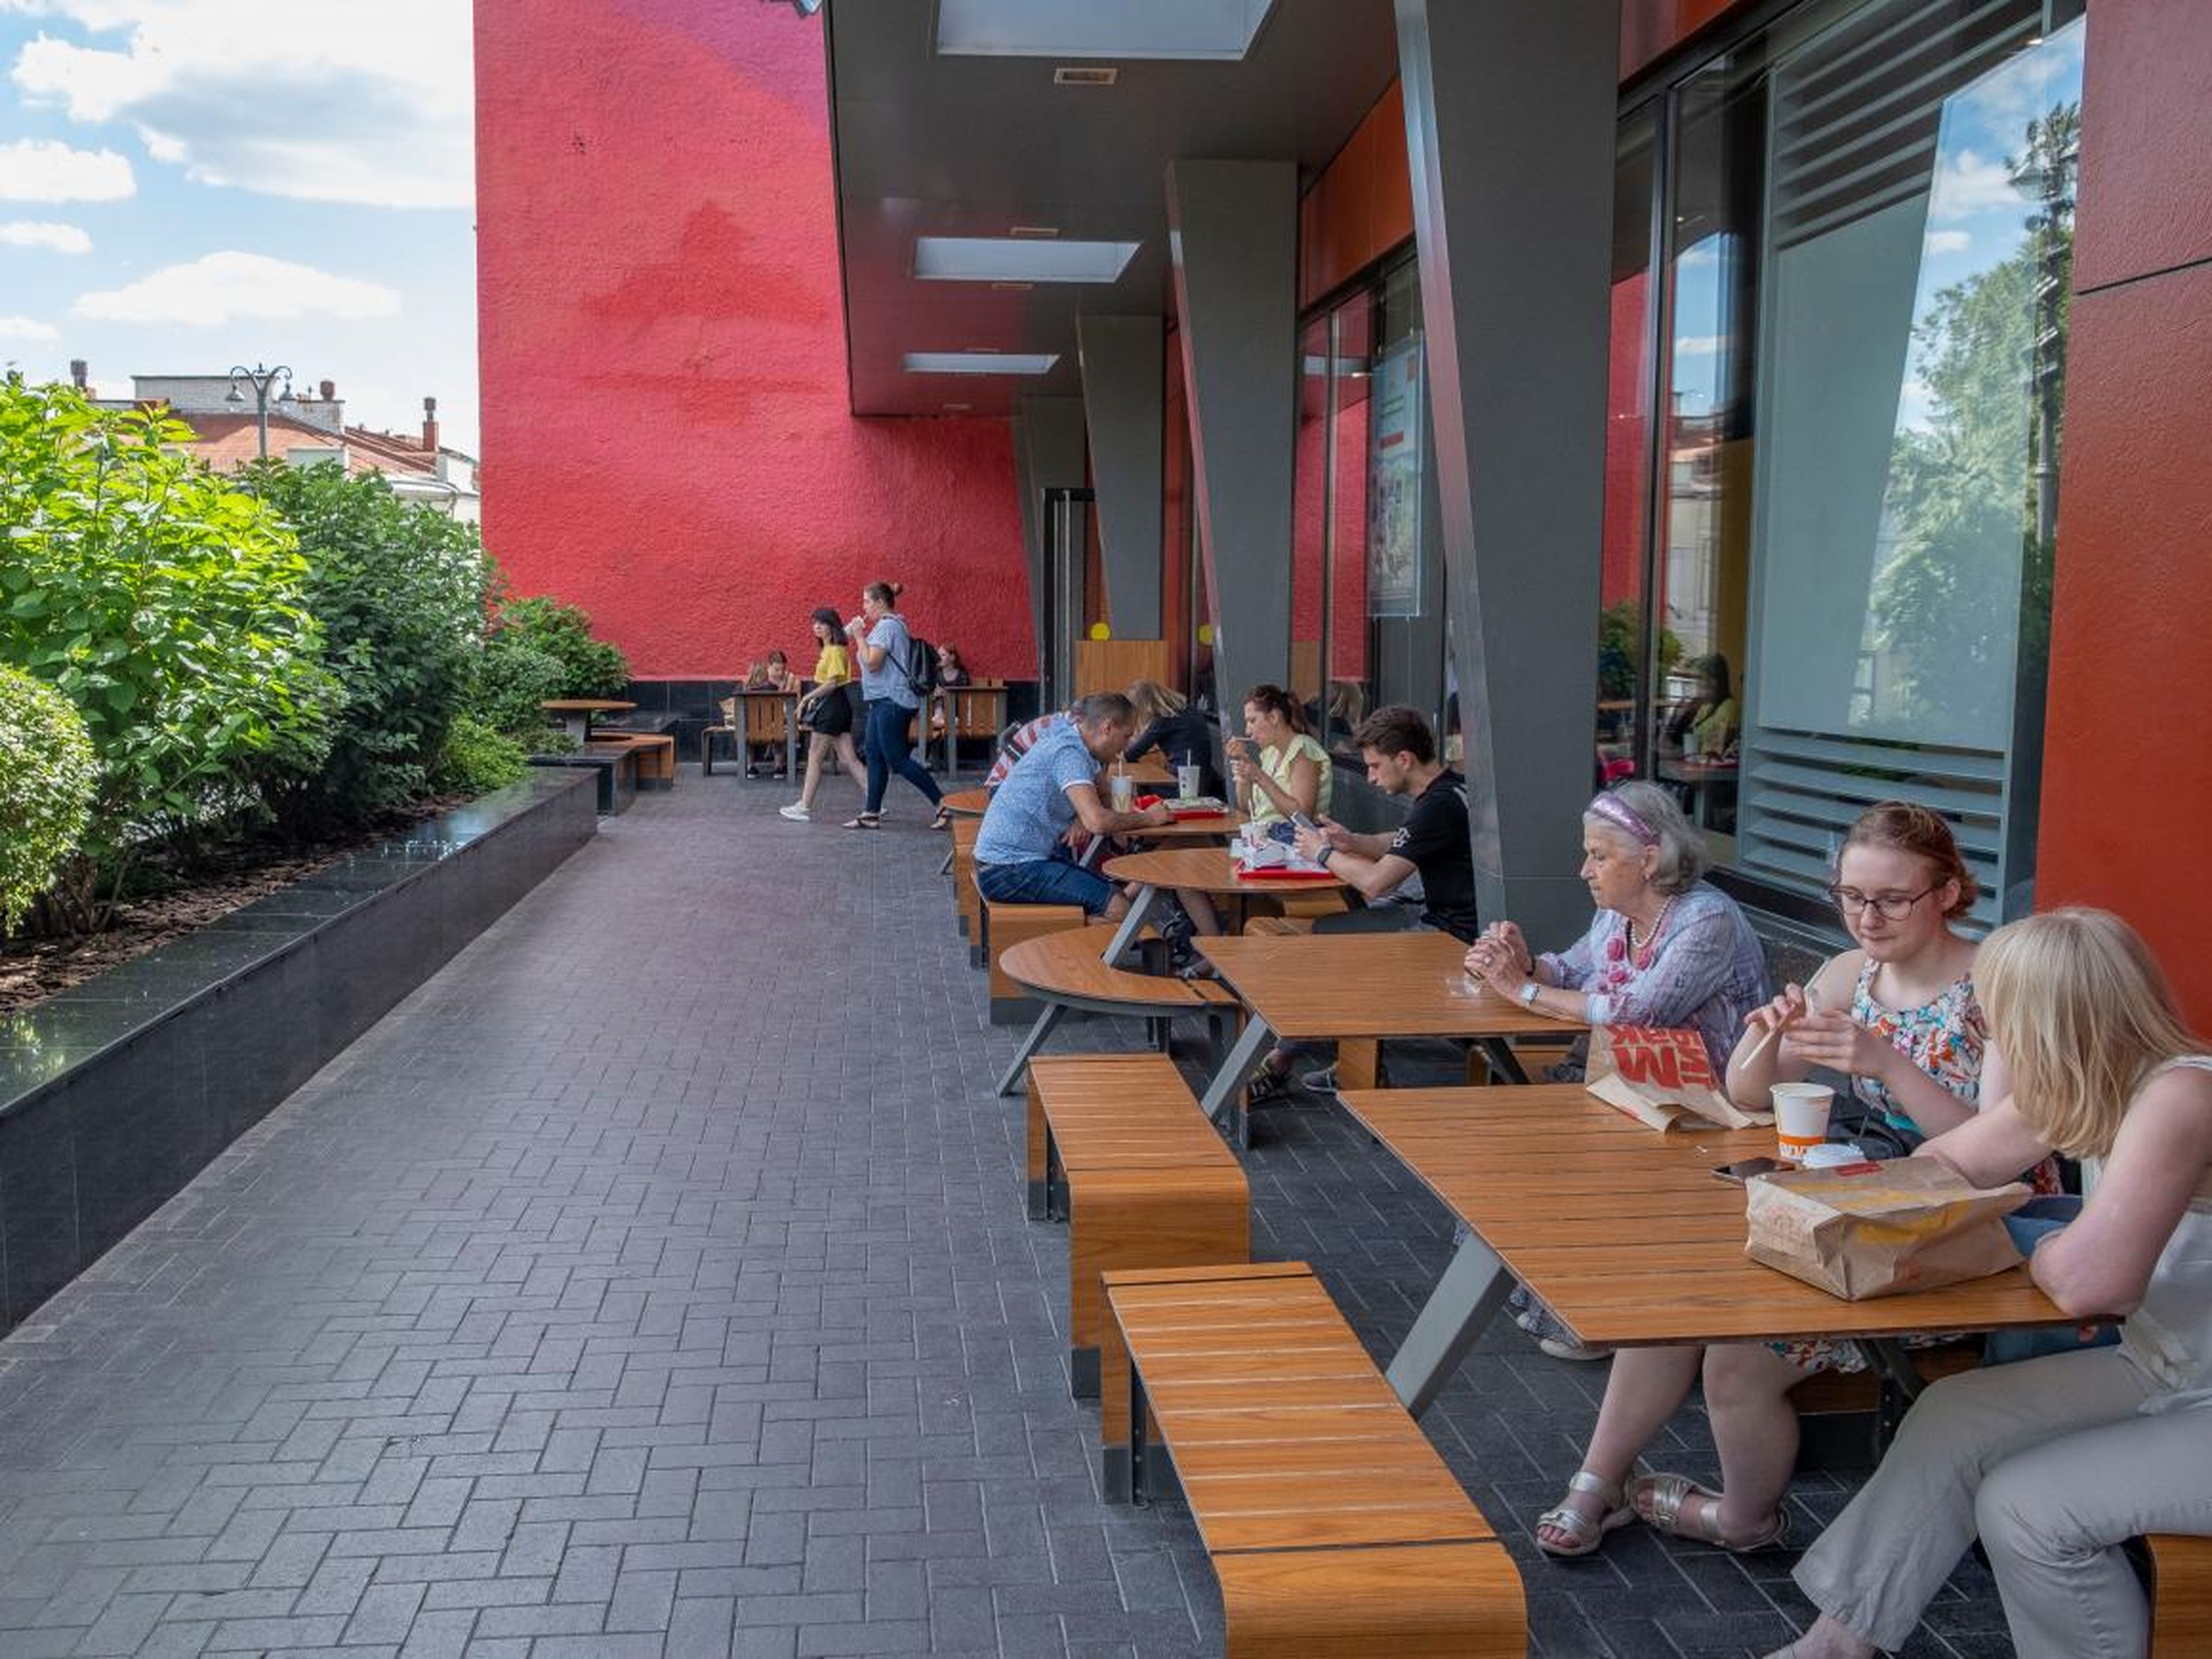 Outside, Moscow's first McDonald's has a spacious seating area.